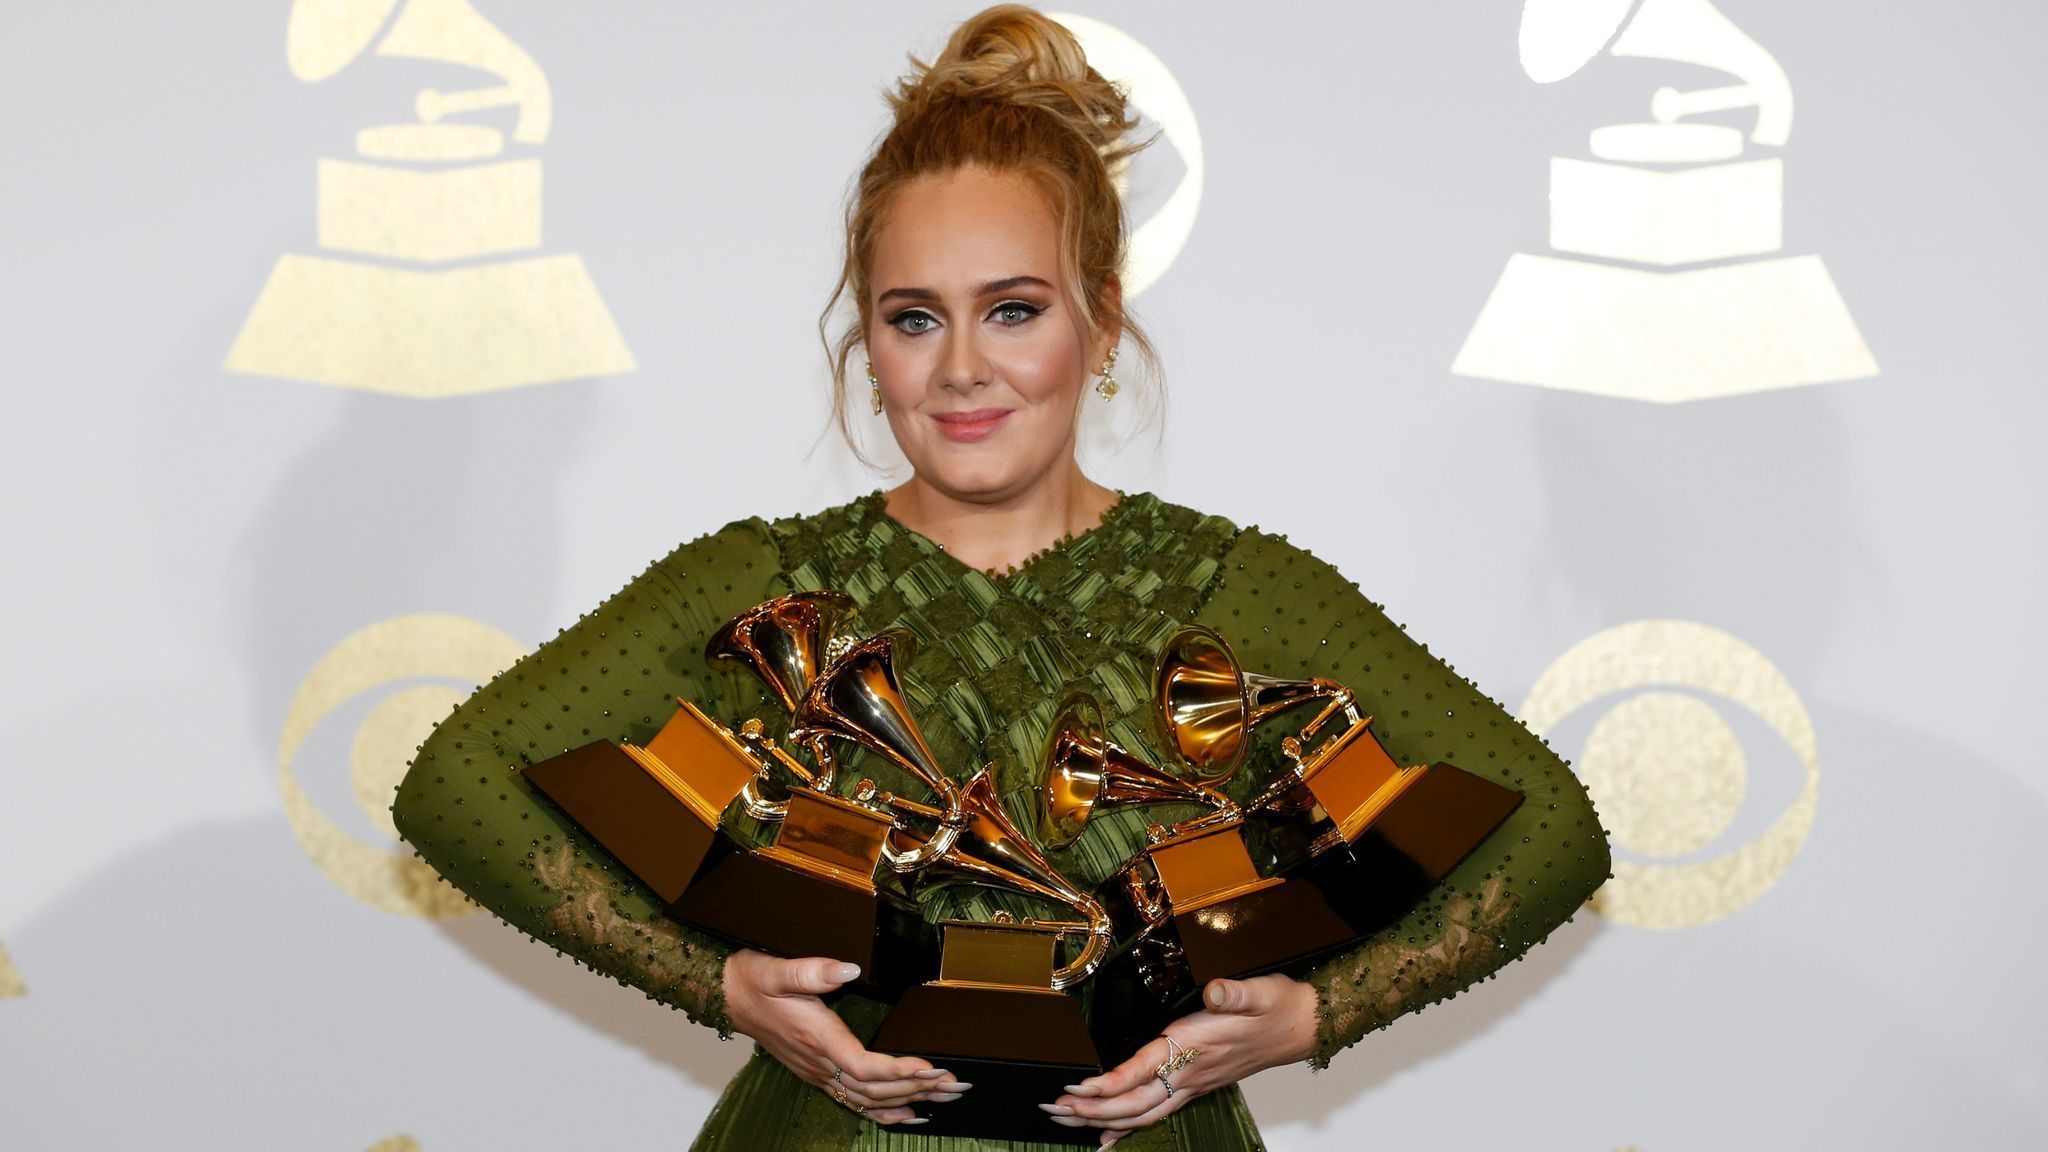 The Grammy Awards return to Los Angeles in 2019 - Hartford Courant